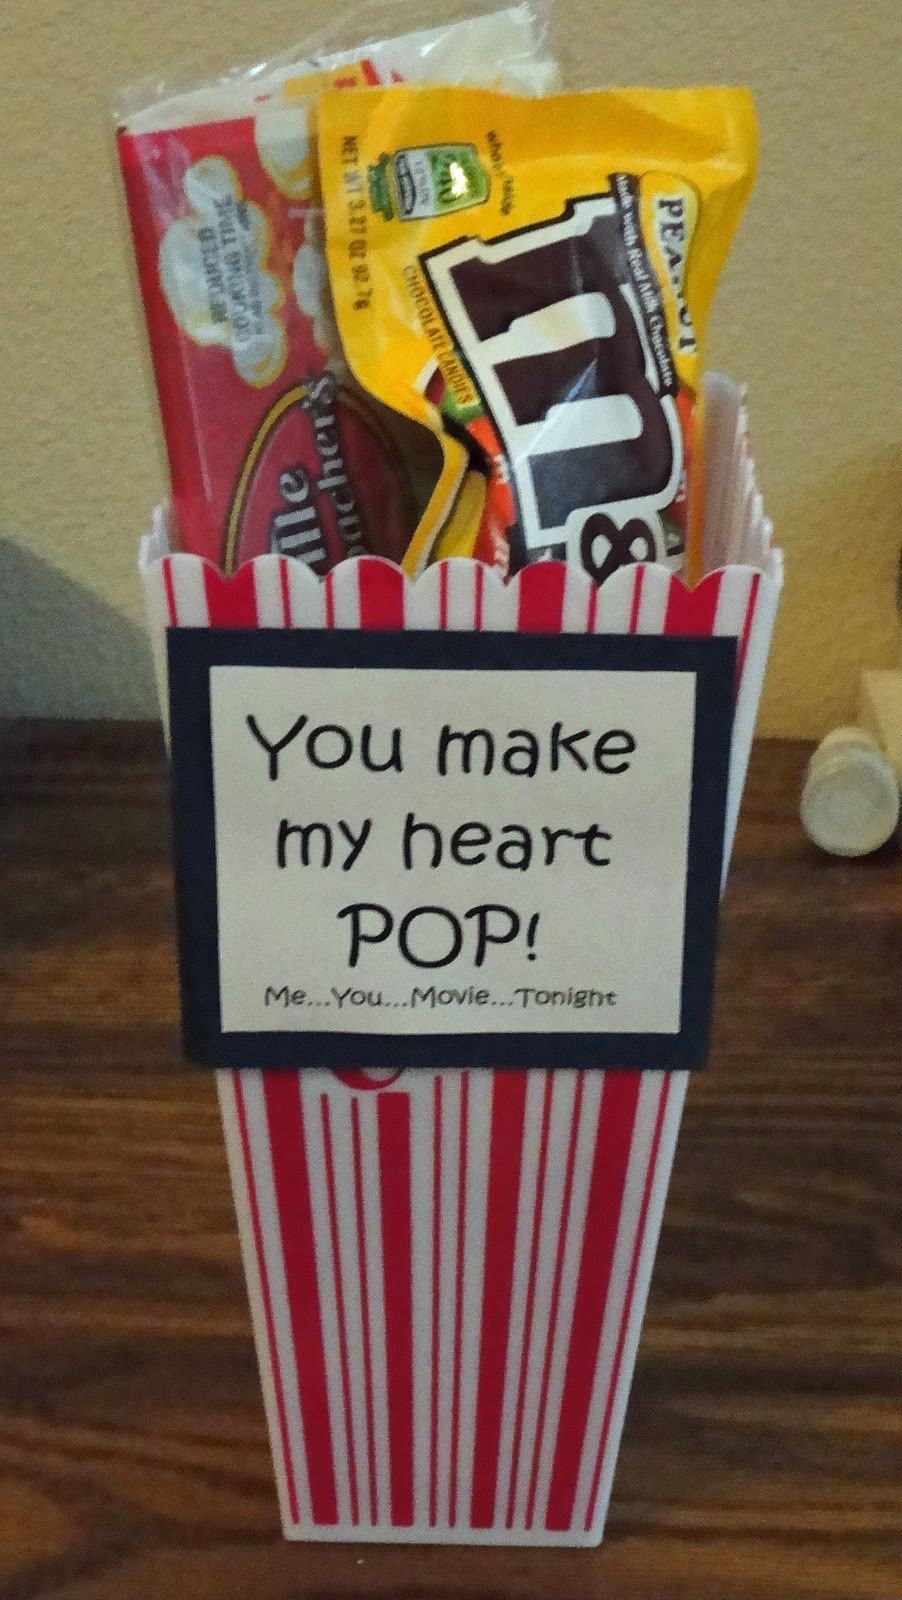 Movie night on Valentine's Day for the kids….cute to have waiting for them